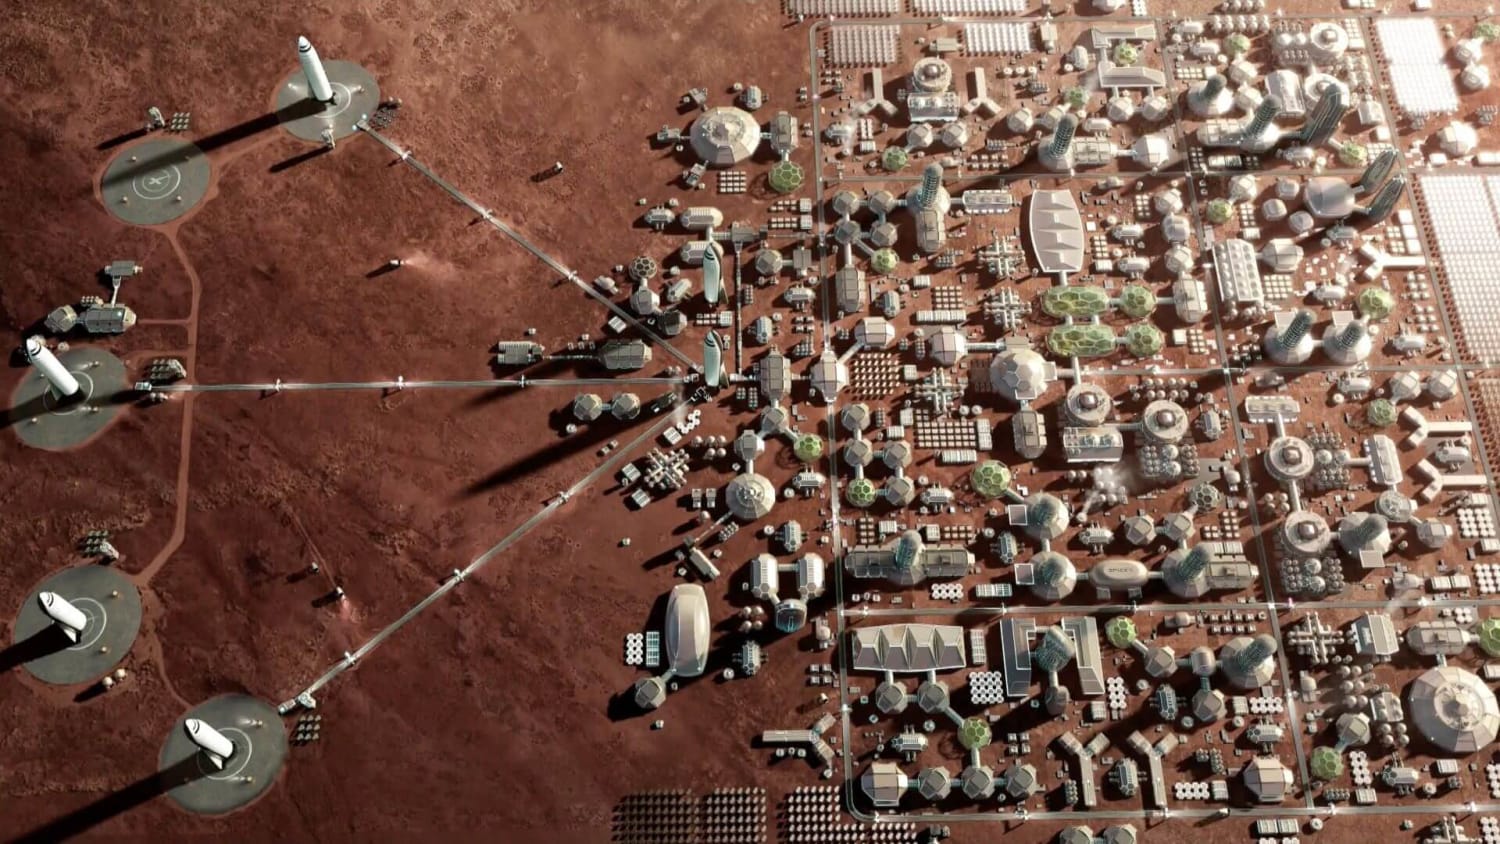 Read Elon Musk's bold Mars colony plan for free online